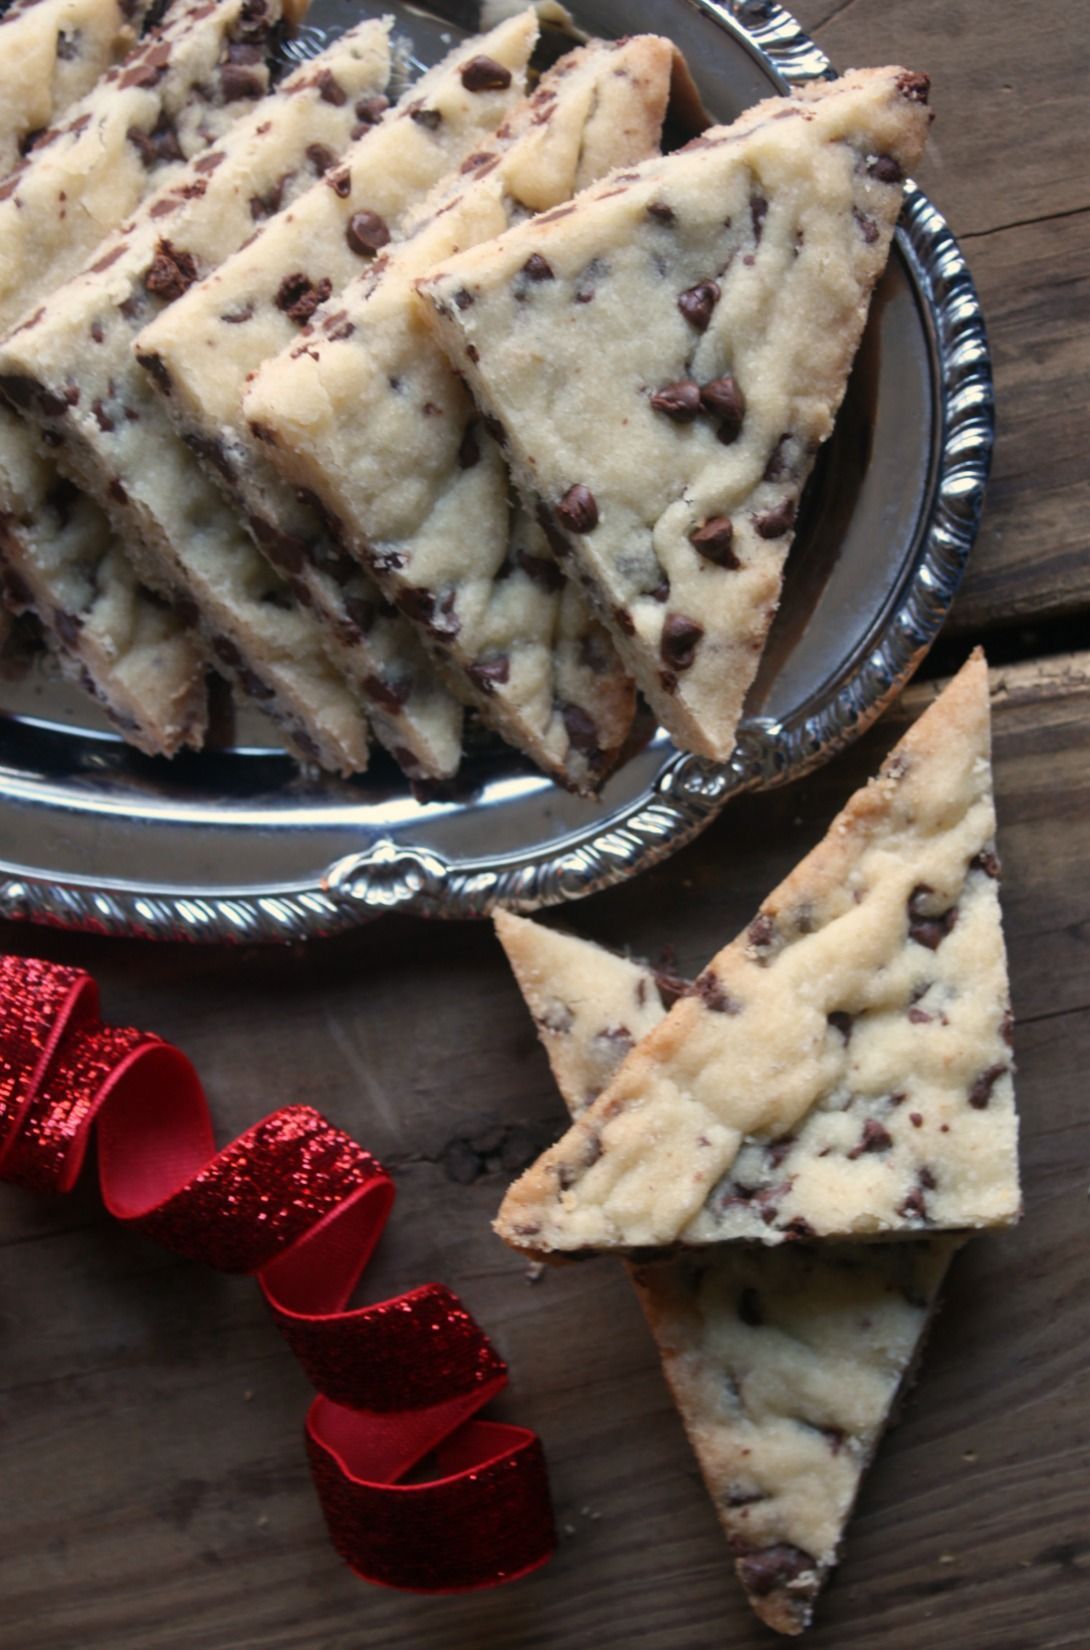 Chocolate Chip Shortbread Cookies. Add this to your holiday baking list.